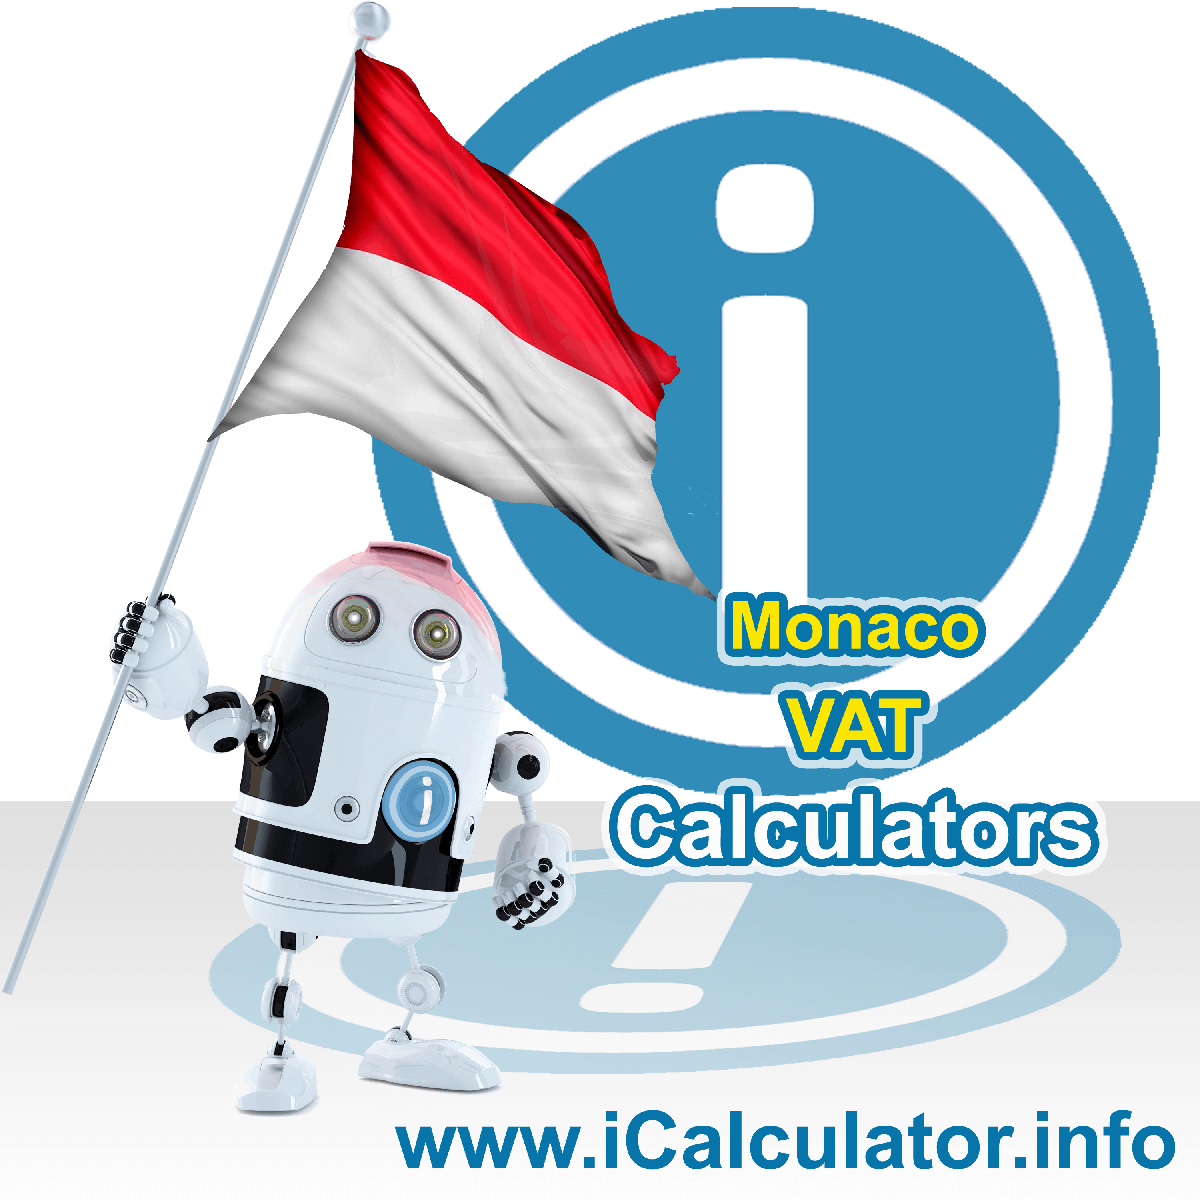 Monaco VAT Calculator. This image shows the Monaco flag and information relating to the VAT formula used for calculating Value Added Tax in Monaco using the Monaco VAT Calculator in 2023